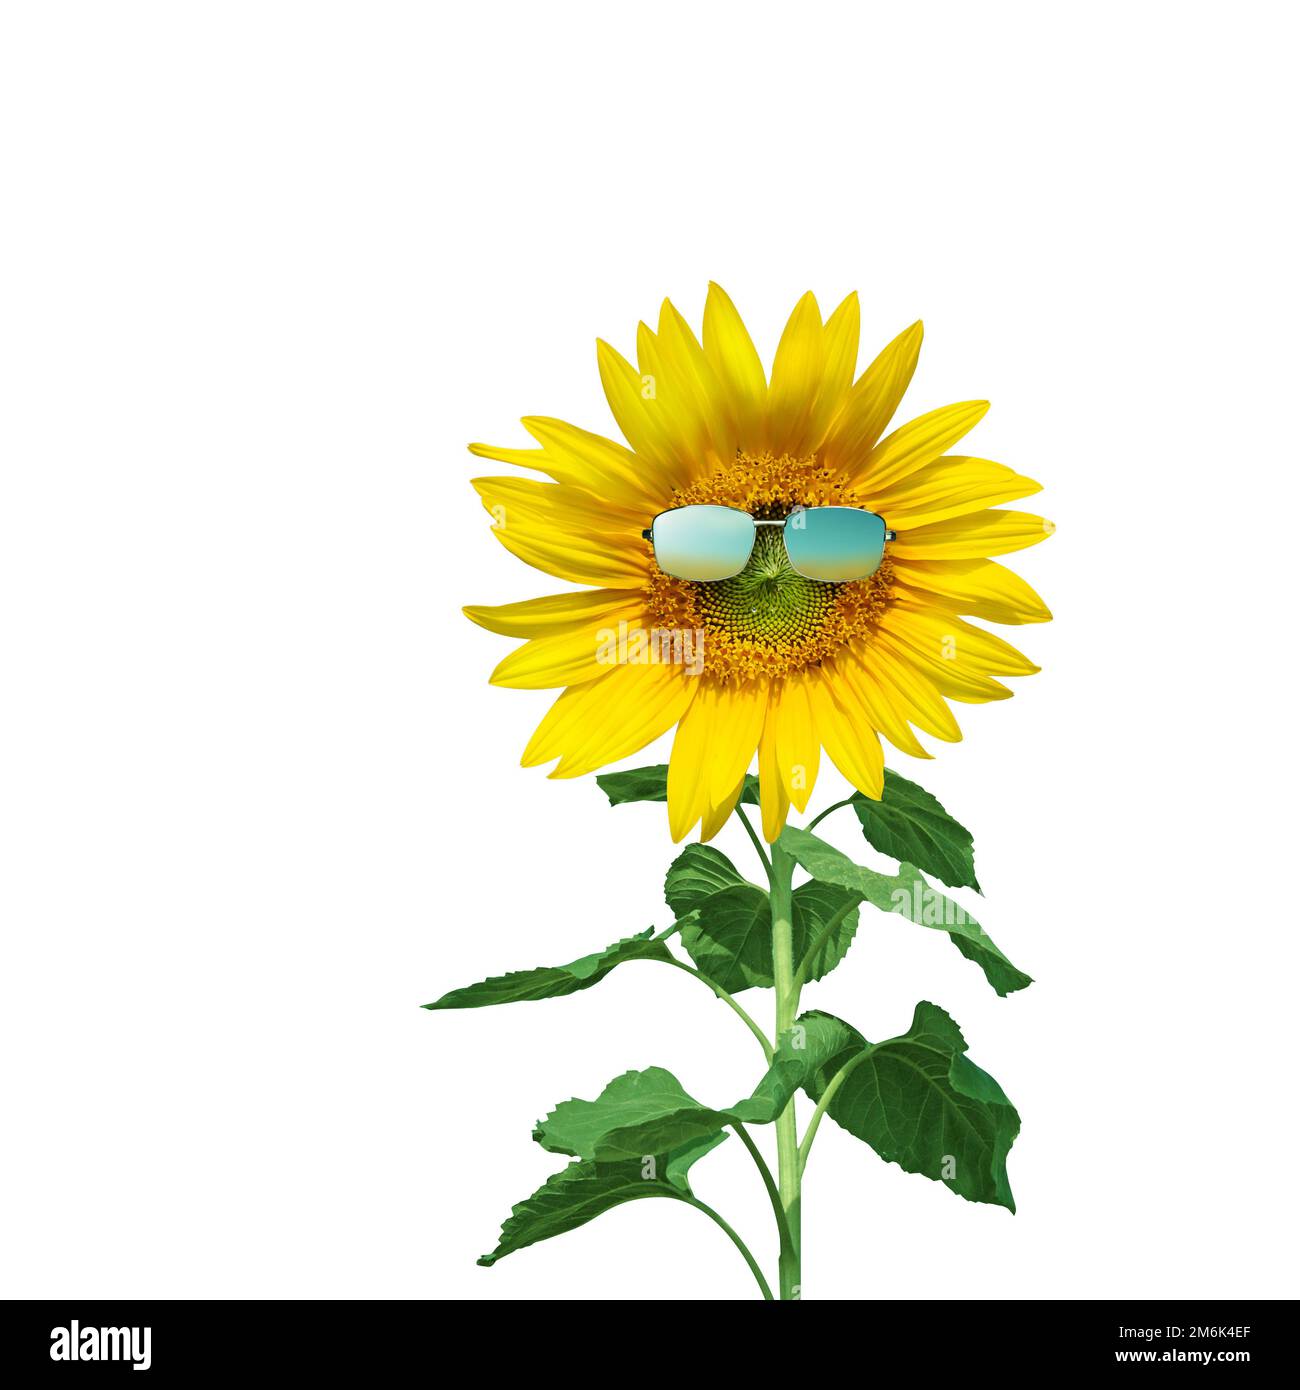 Funny sunflower with sunglasses on a white background Stock Photo